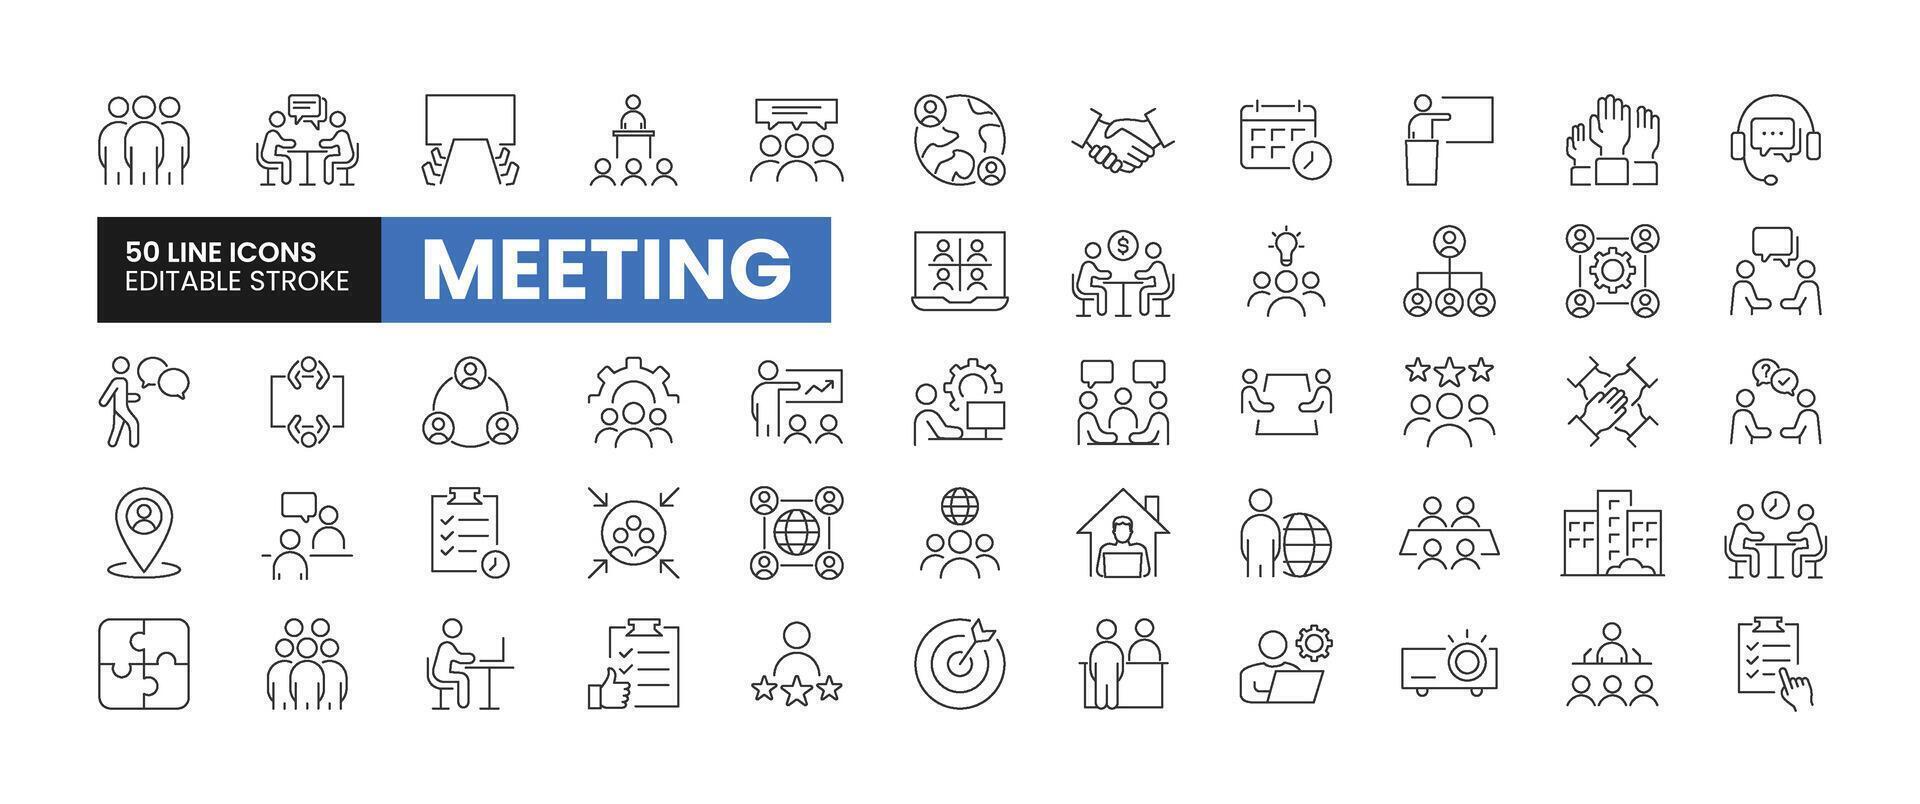 Set of 50 Meeting line icons set. Meeting outline icons with editable stroke collection. Includes Business Meetings, Conference, Summit, Work From Home, Online Meetings, and More. vector